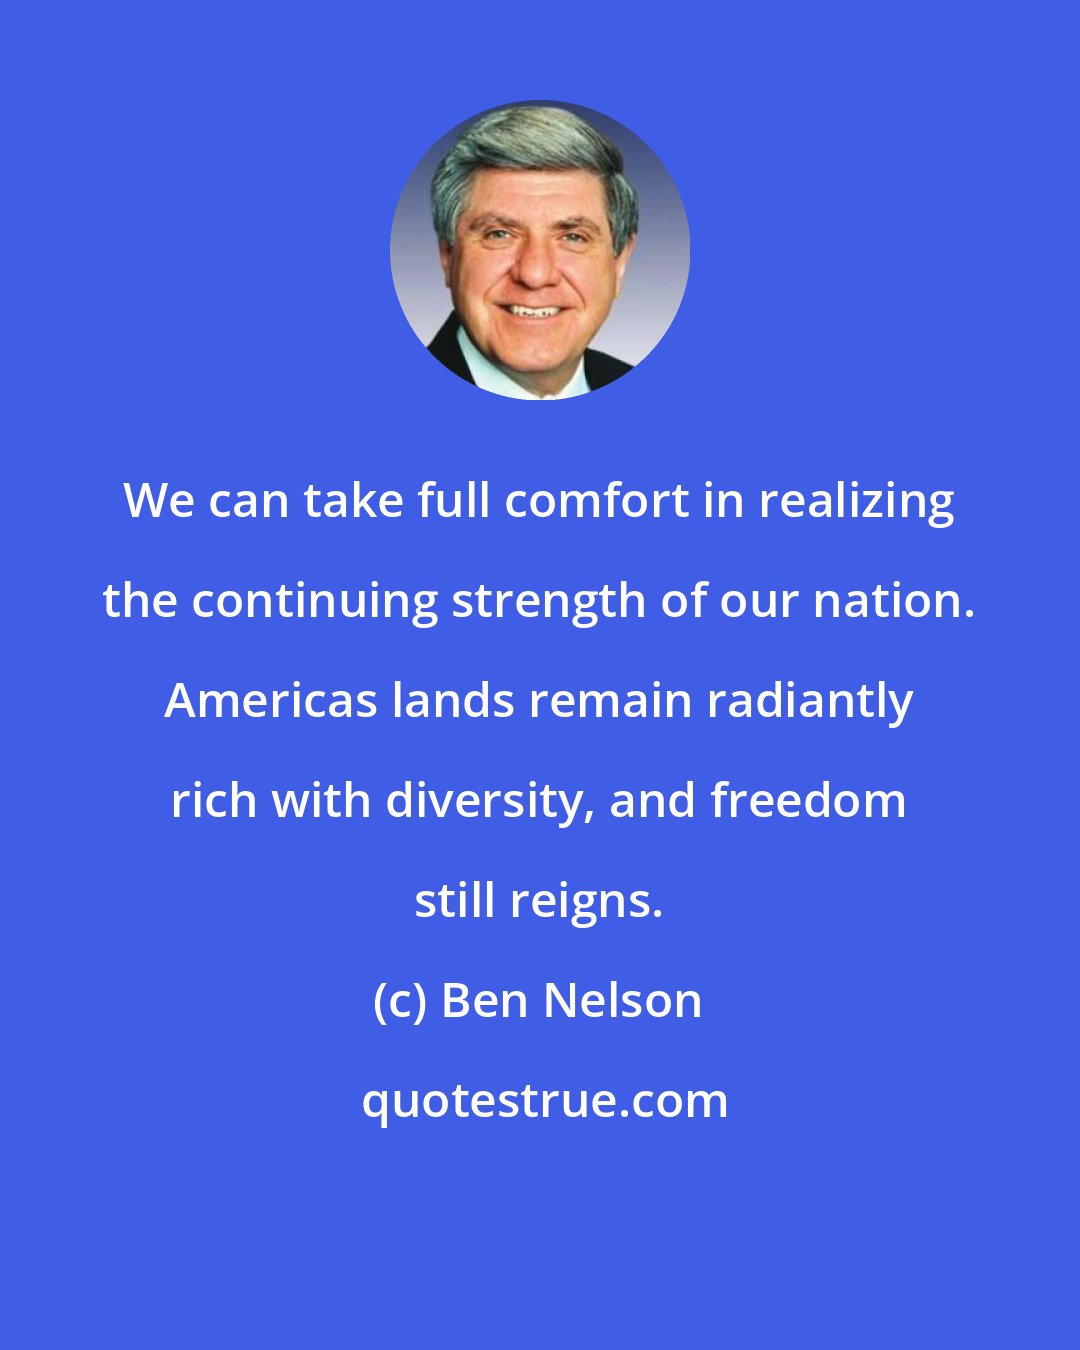 Ben Nelson: We can take full comfort in realizing the continuing strength of our nation. Americas lands remain radiantly rich with diversity, and freedom still reigns.